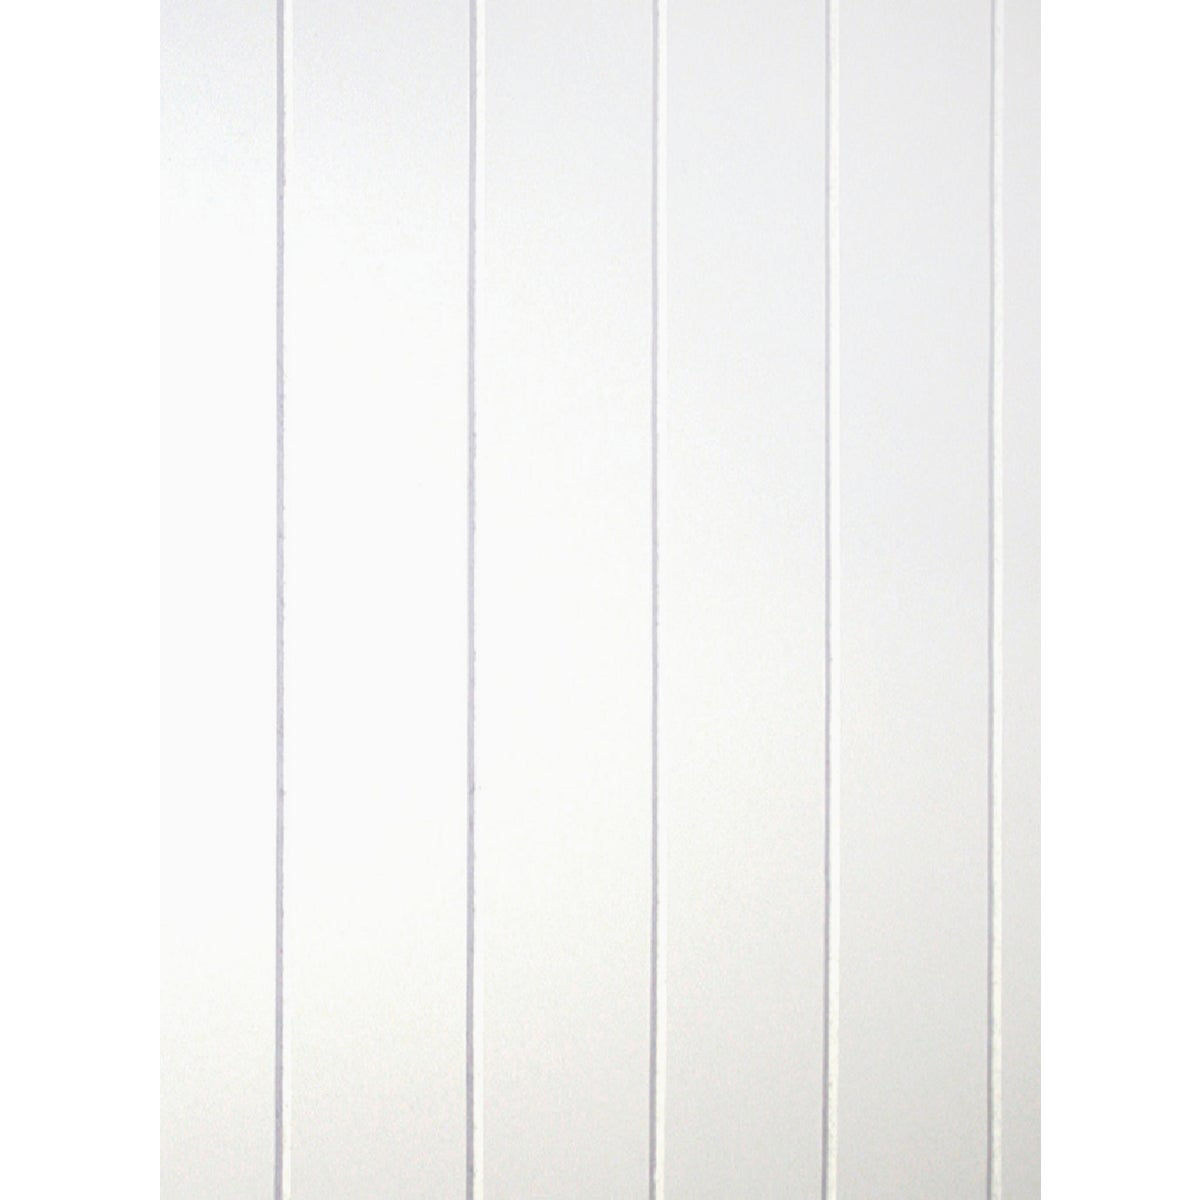 V-Groove Wall Panels, Grooved MDF Wall Board